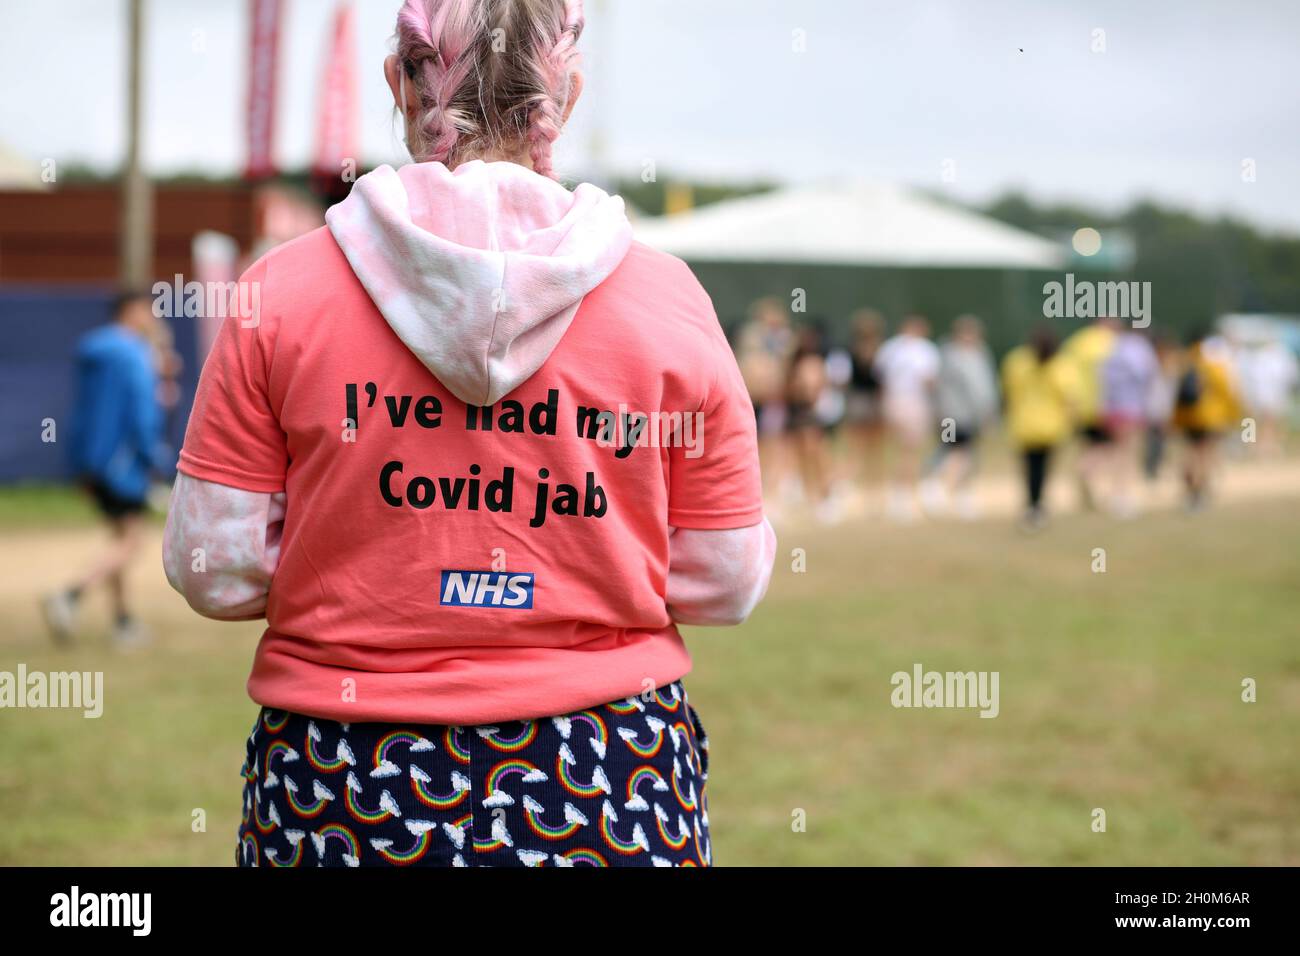 A worker at the Covid 19 Vaccination Centre tent waits and watches the crowds of young people at the Leeds Festival in west Yorkshire. Young people ar Stock Photo